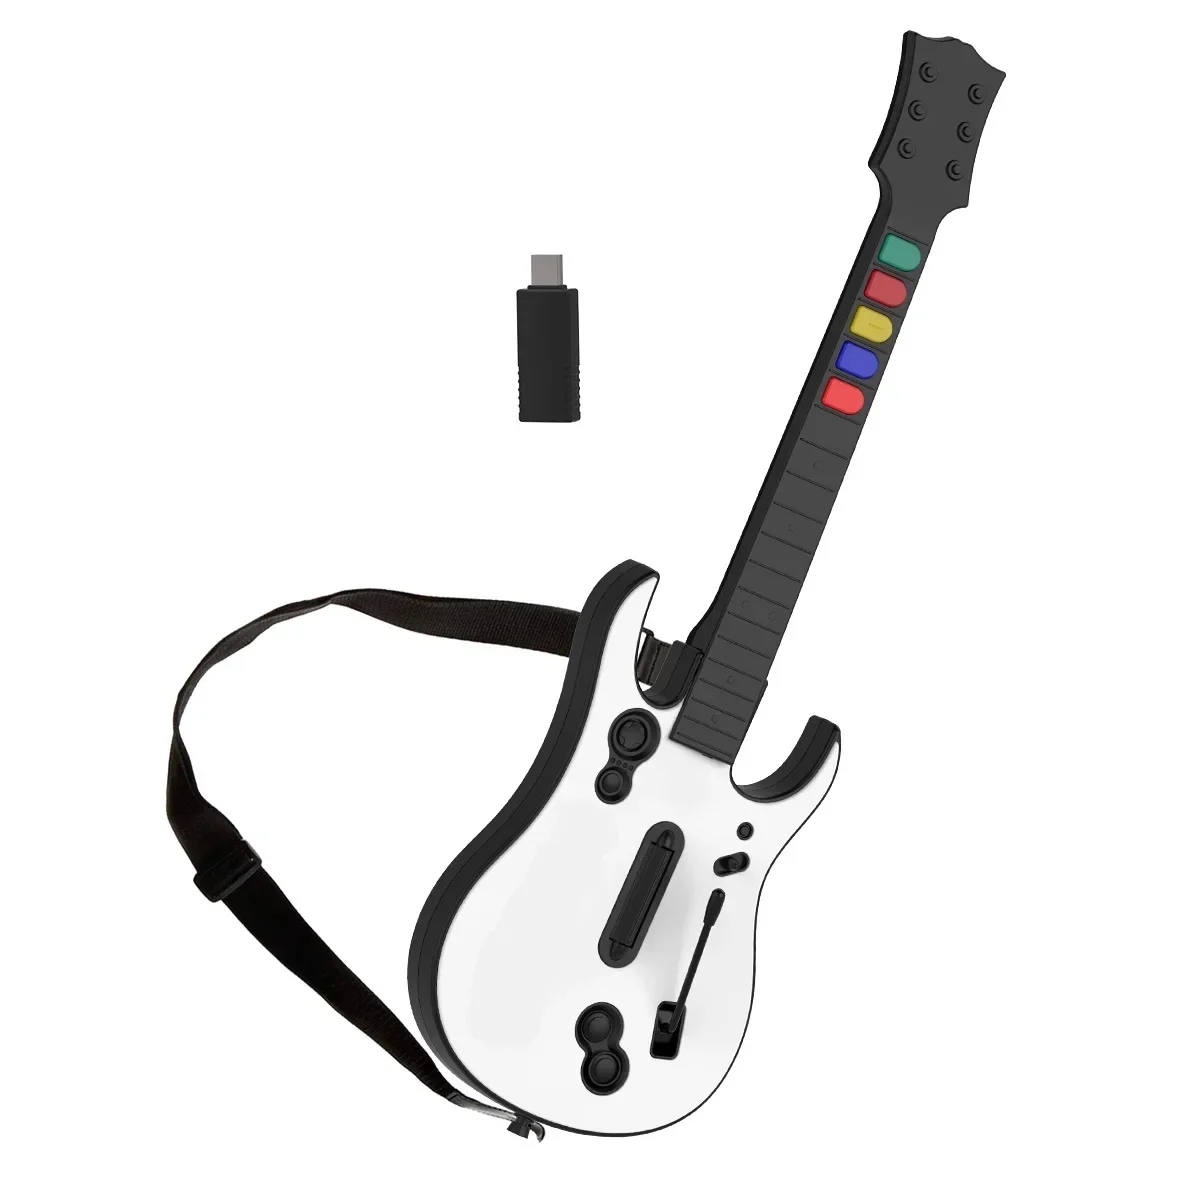 Guitar Hero Game Wireless Gaming Controller Guitar Hero Rock band 2.4 G Remote Guitar Handle Console Gamepad 5Key For PC PS3 PC